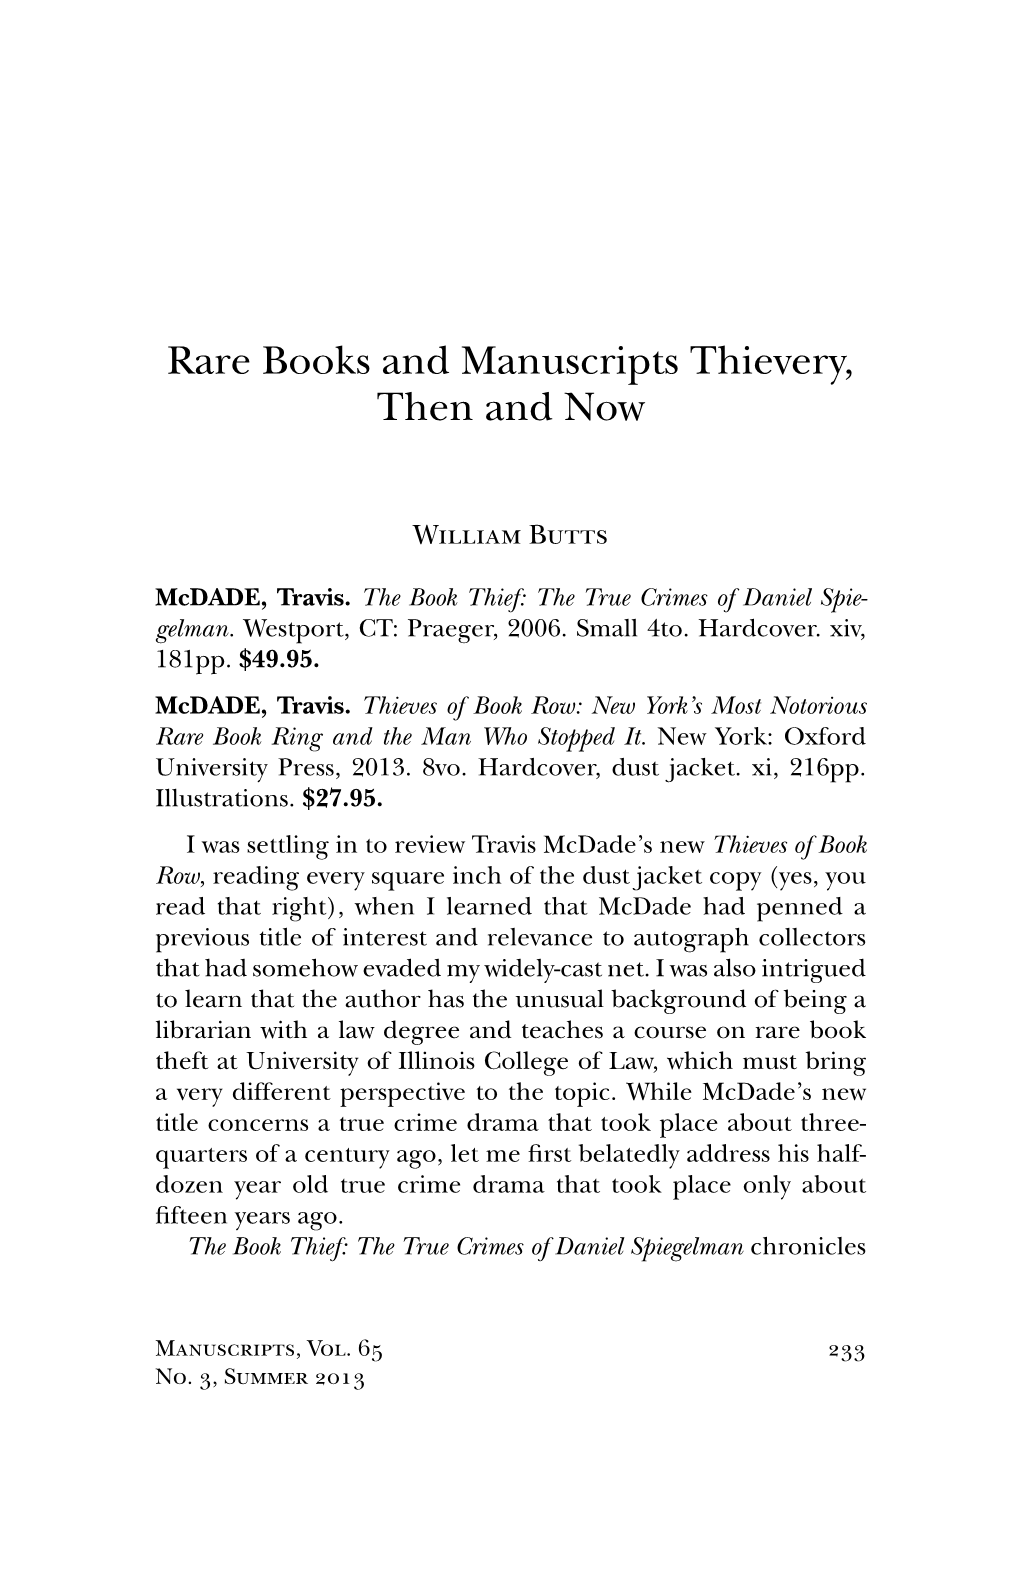 Rare Books and Manuscripts Thievery, Then and Now